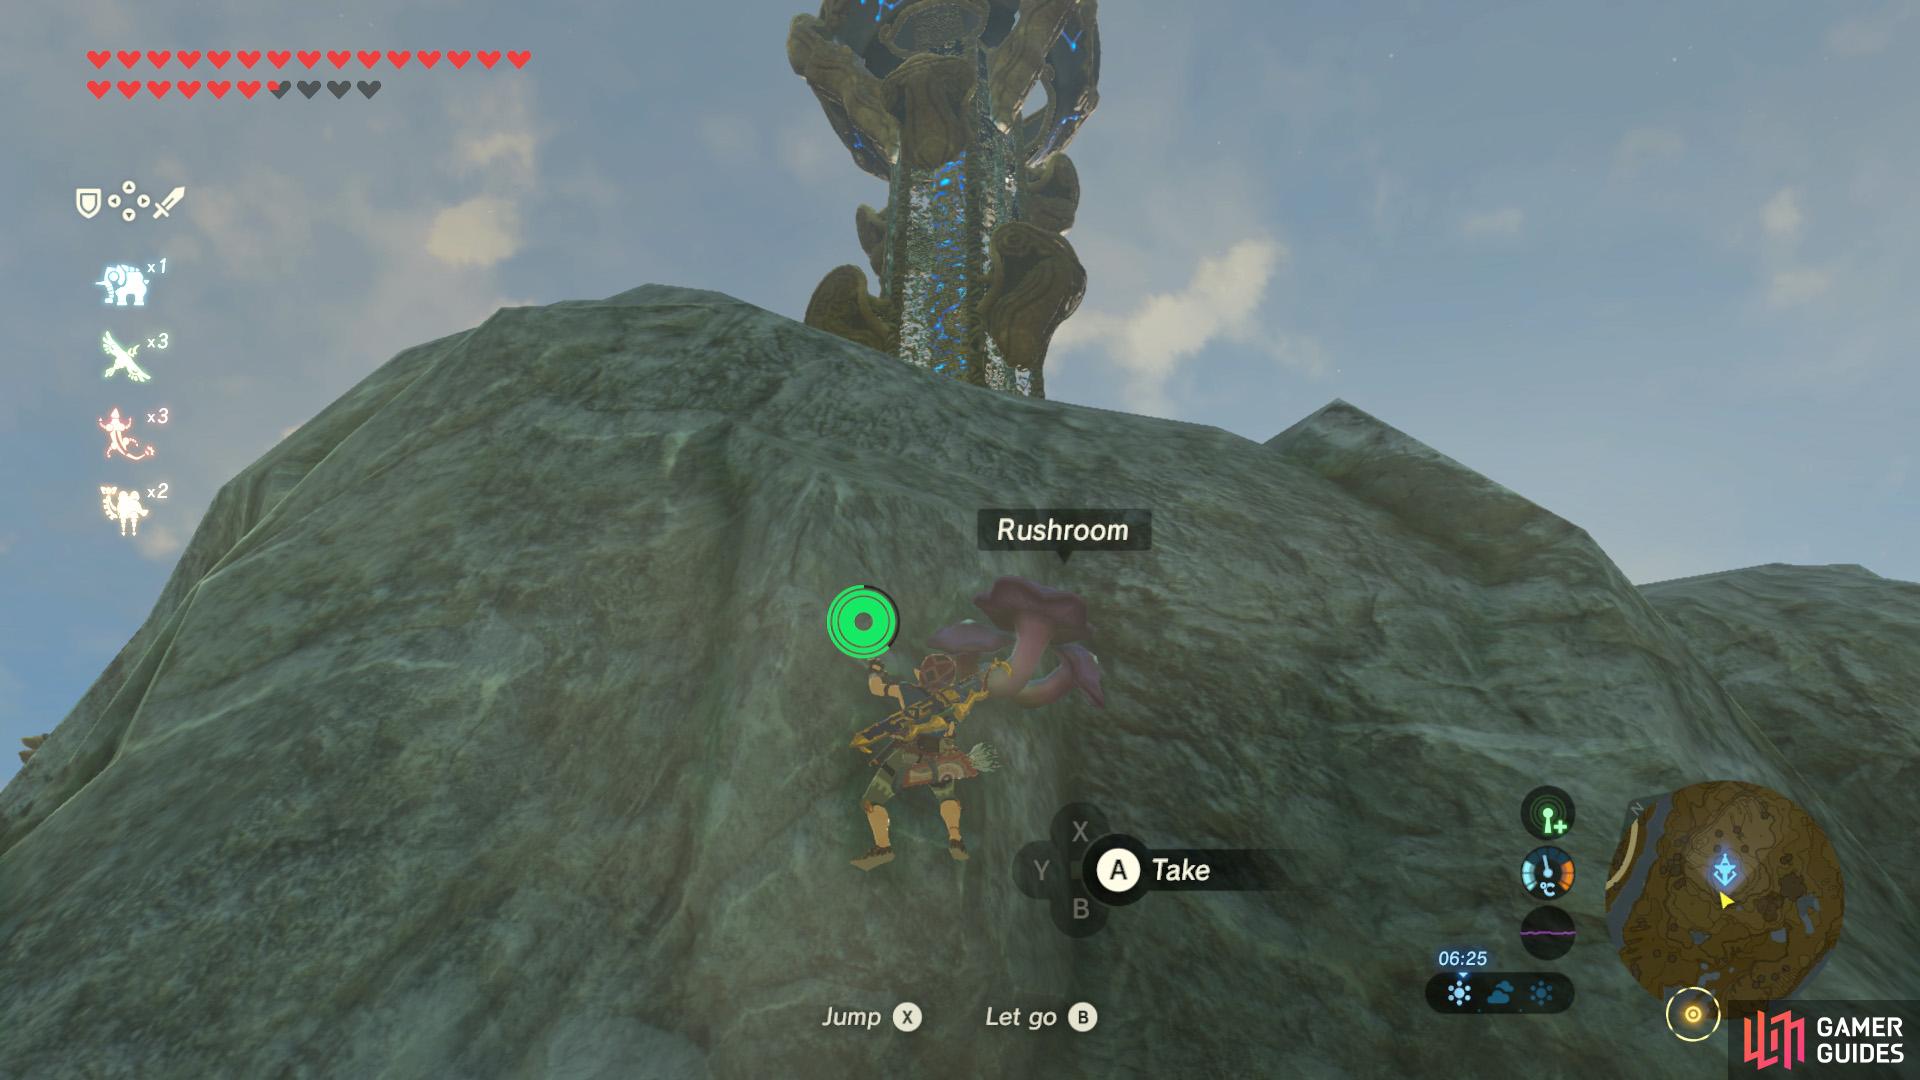 You can fast-travel to the tower, then glide down the mountain, before climbing back up.